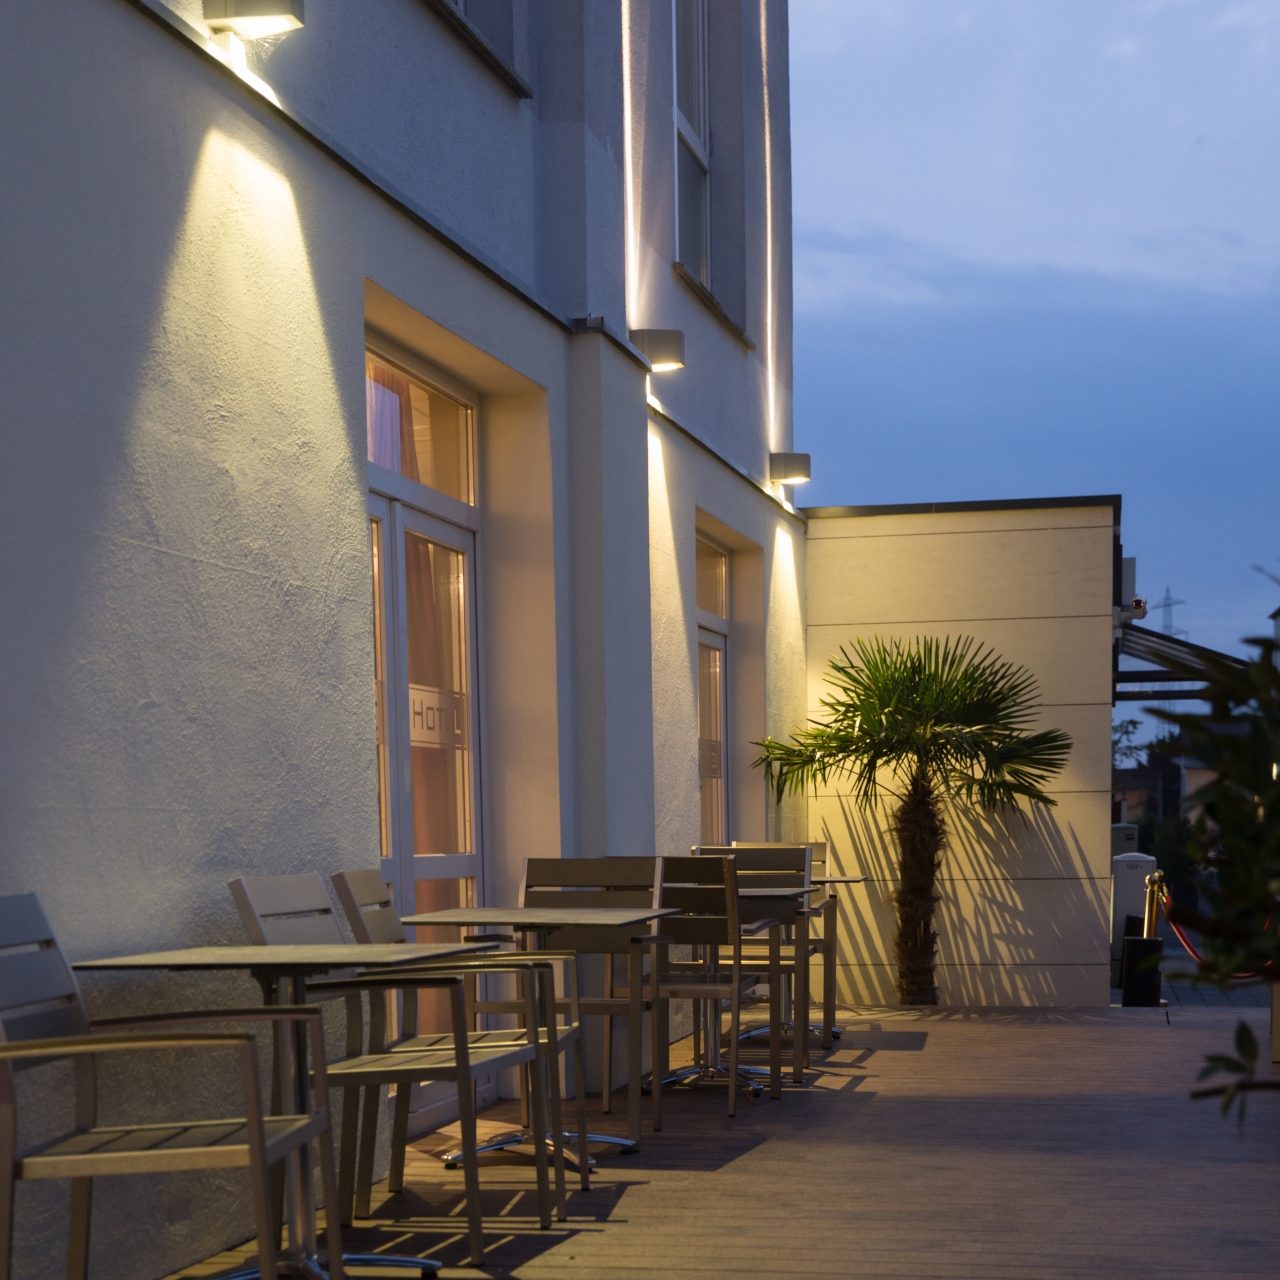 Goethe Hotel Messe By Trip Inn Frankfurt Am Main Hesse At Hrs With Free Services